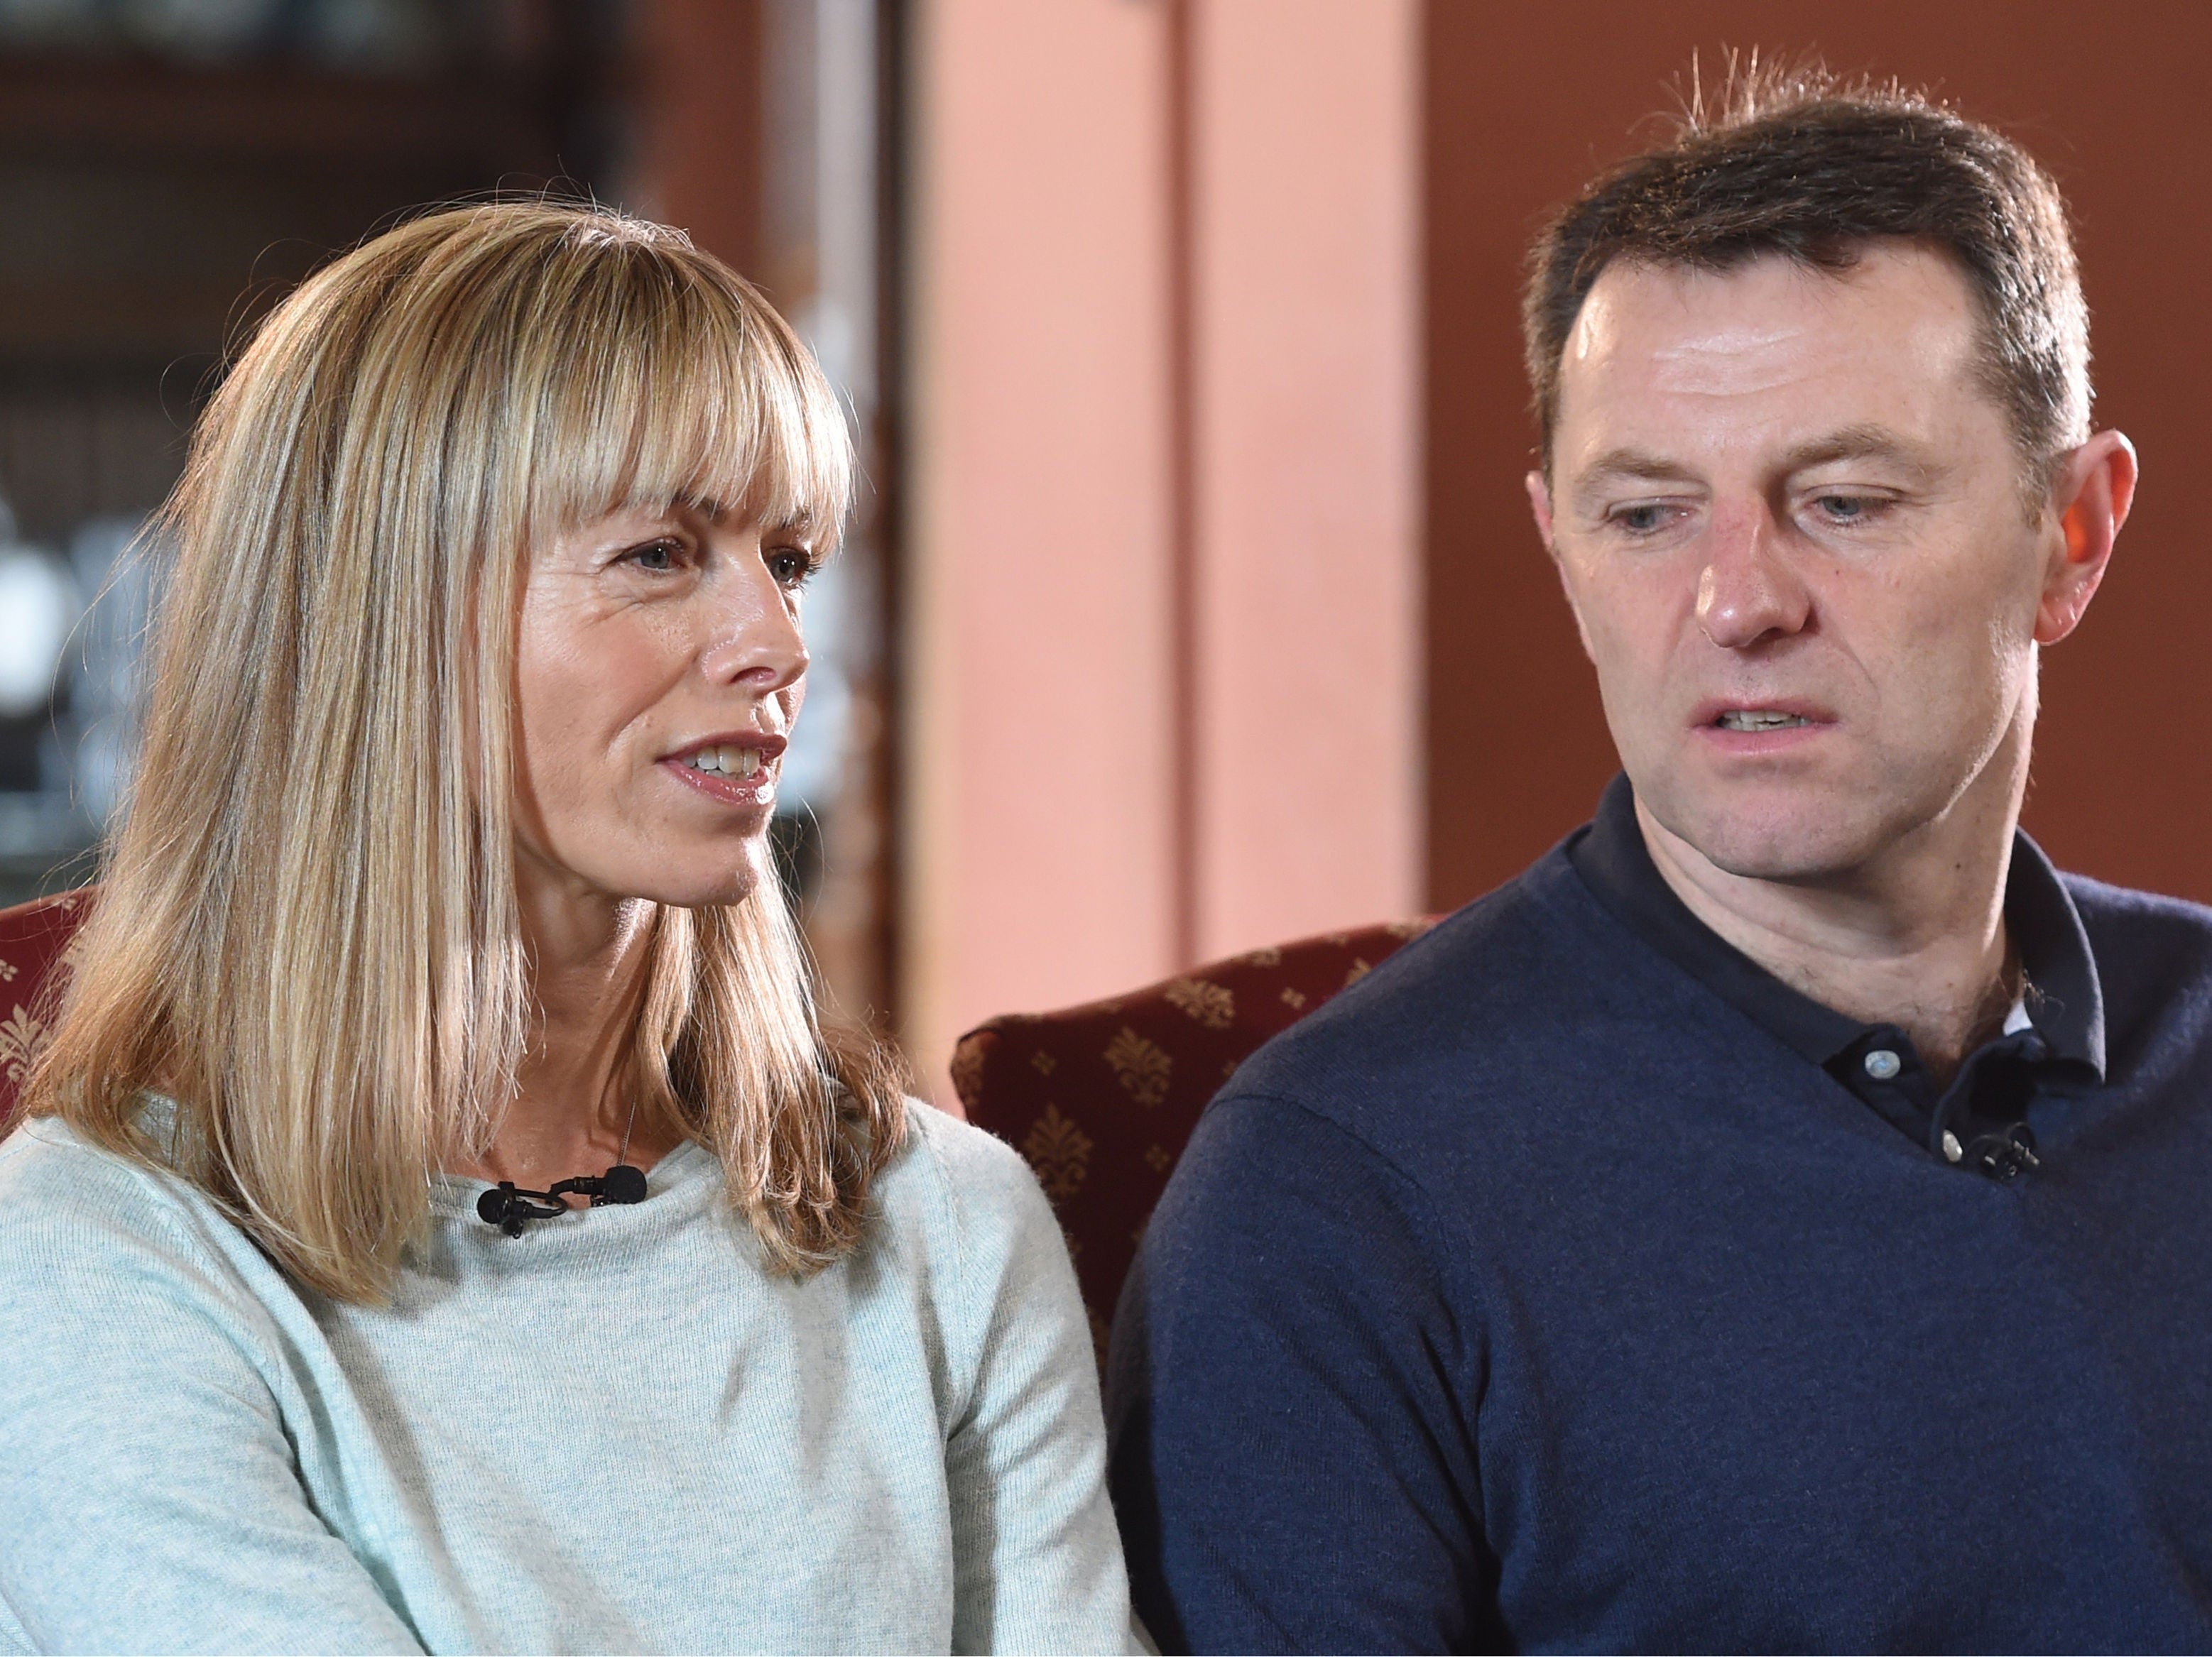 Kate and Gerry McCann have £750,000 in a fund for a private search if police end the hunt for their missing daughter Madeleine McCann